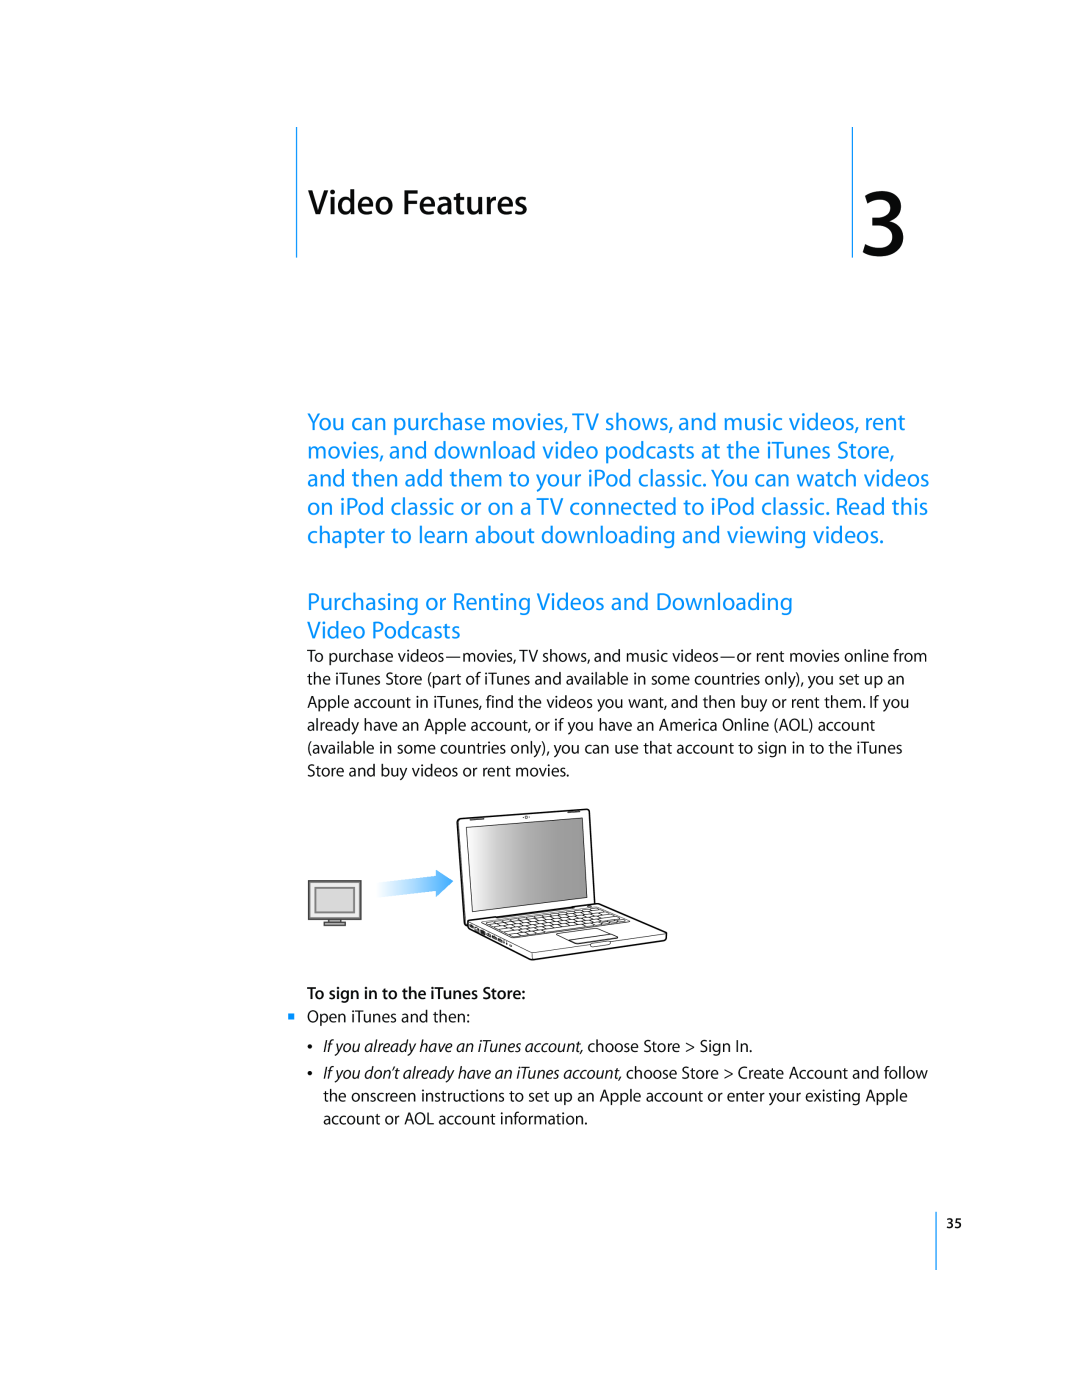 Apple MB029LL/A, FB145LL/A, FB150LL/A, FB147LL/A Video Features, Purchasing or Renting Videos and Downloading Video Podcasts 